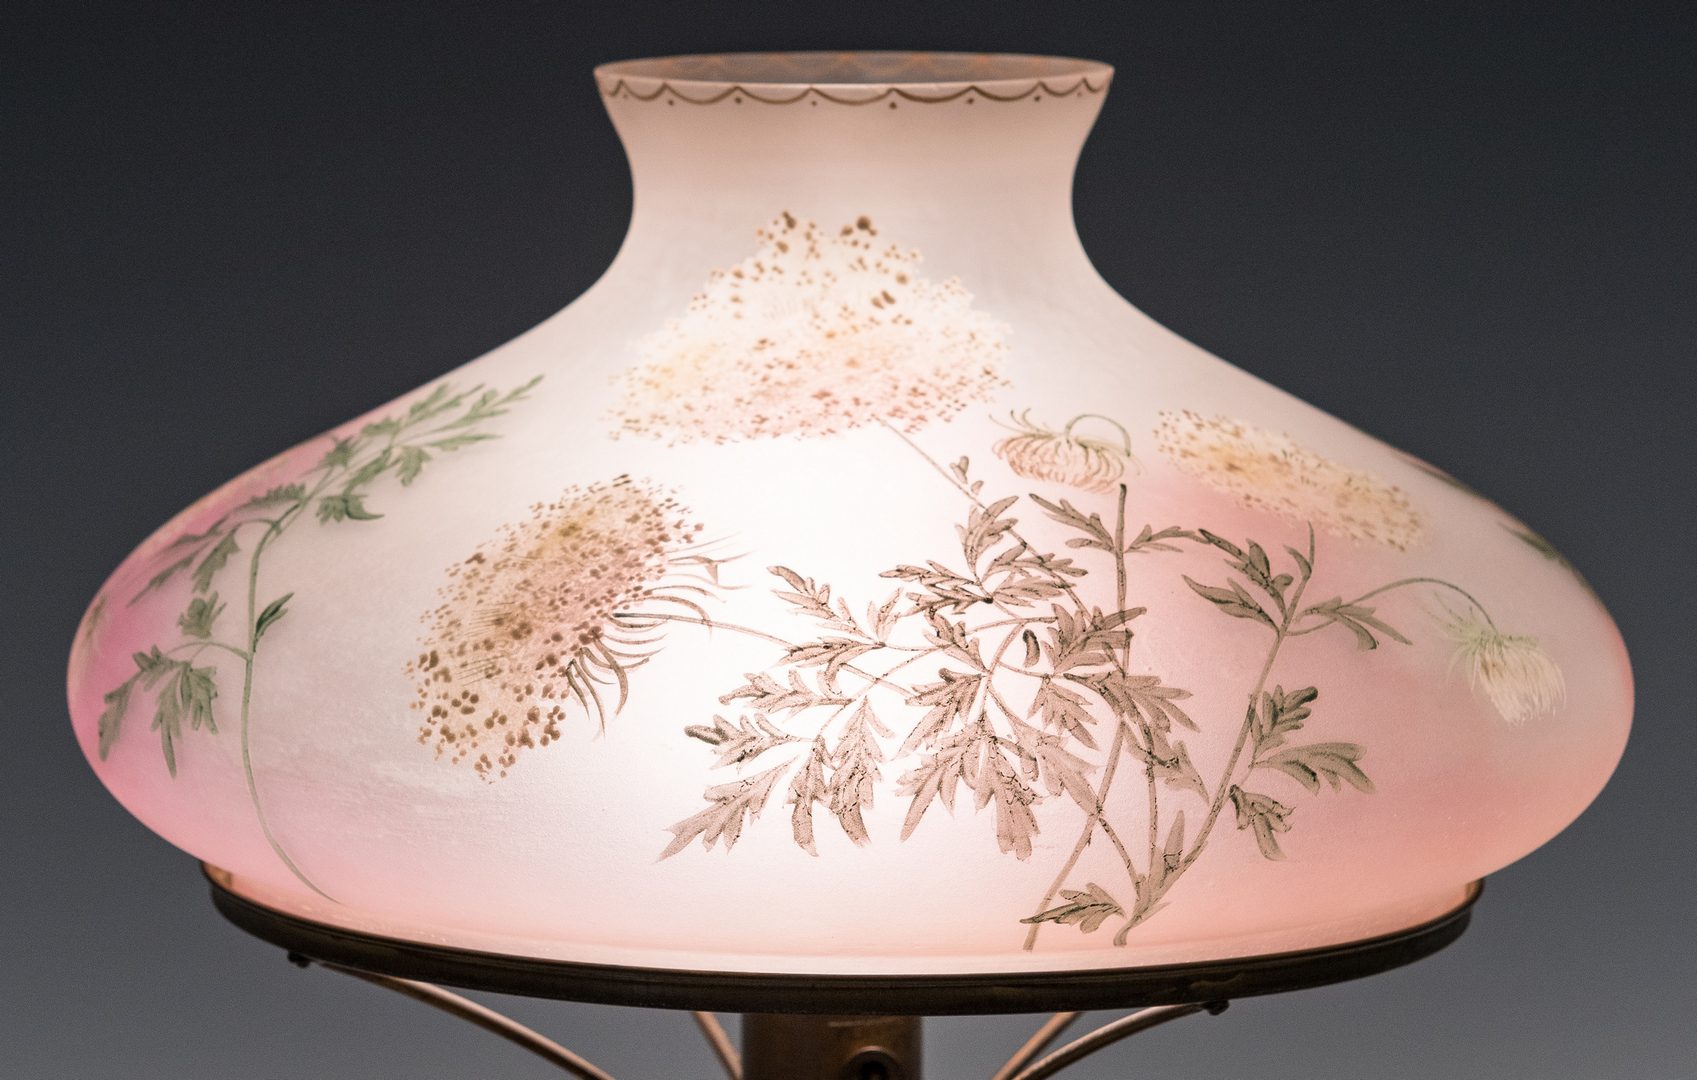 Lot 195: Handel Table Lamp, Forest Base with Floral Shade